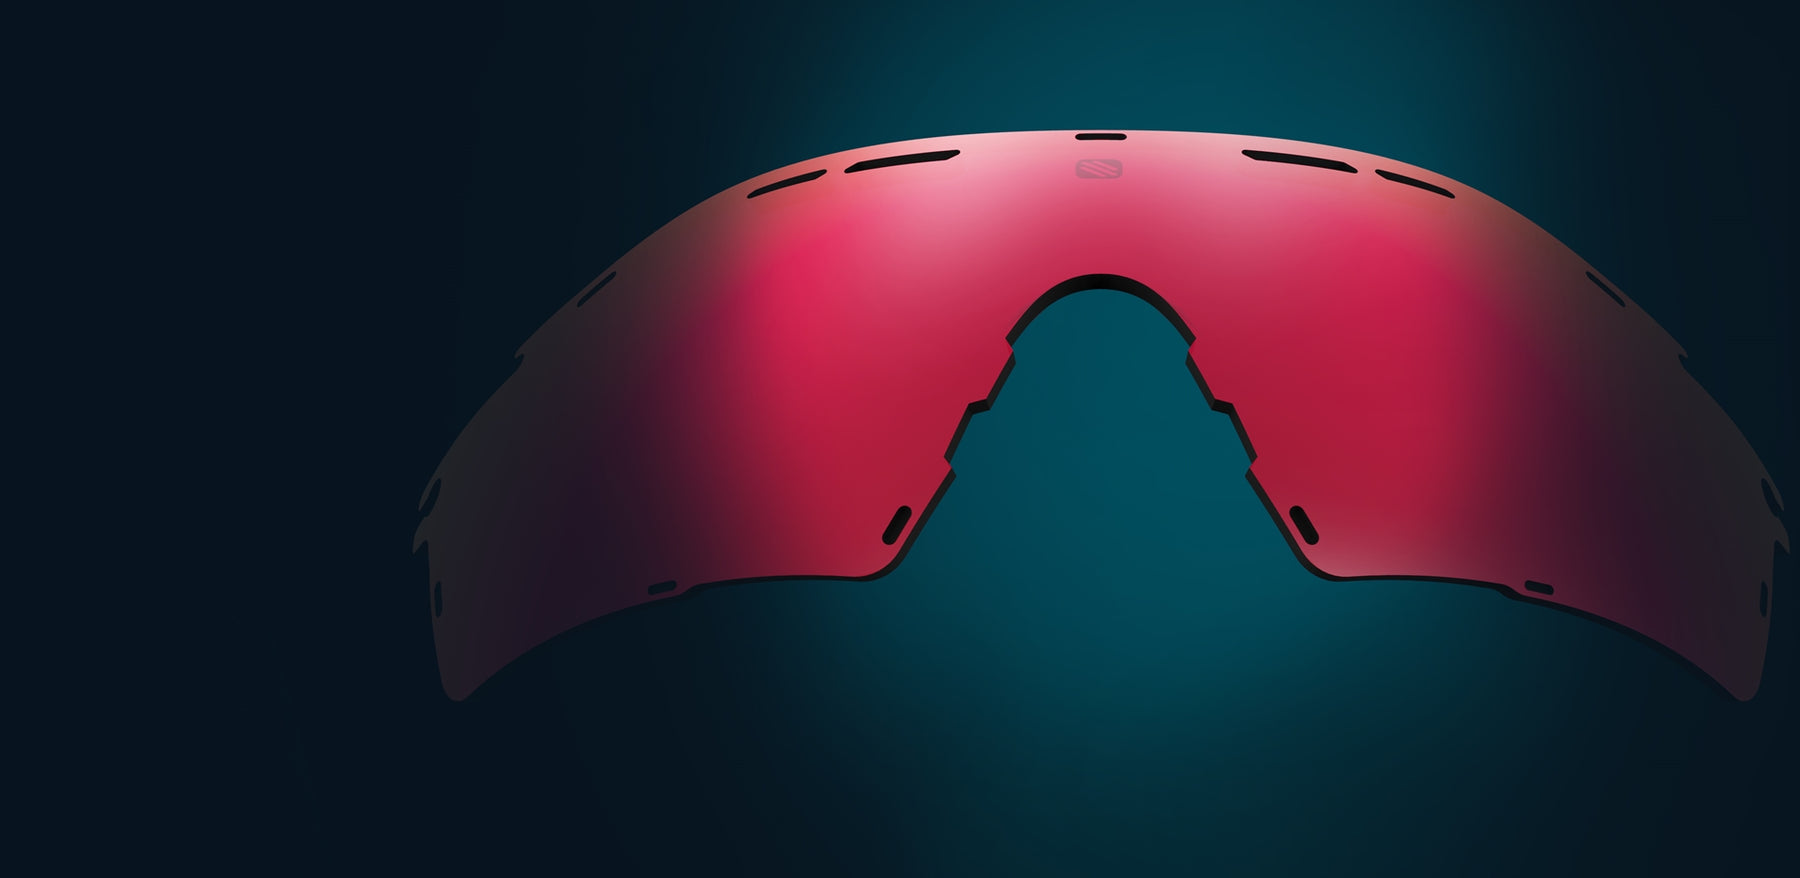 Rudy Project Cutline sport sunglasses with adjustable nose pads for a snug, comfortable fit.